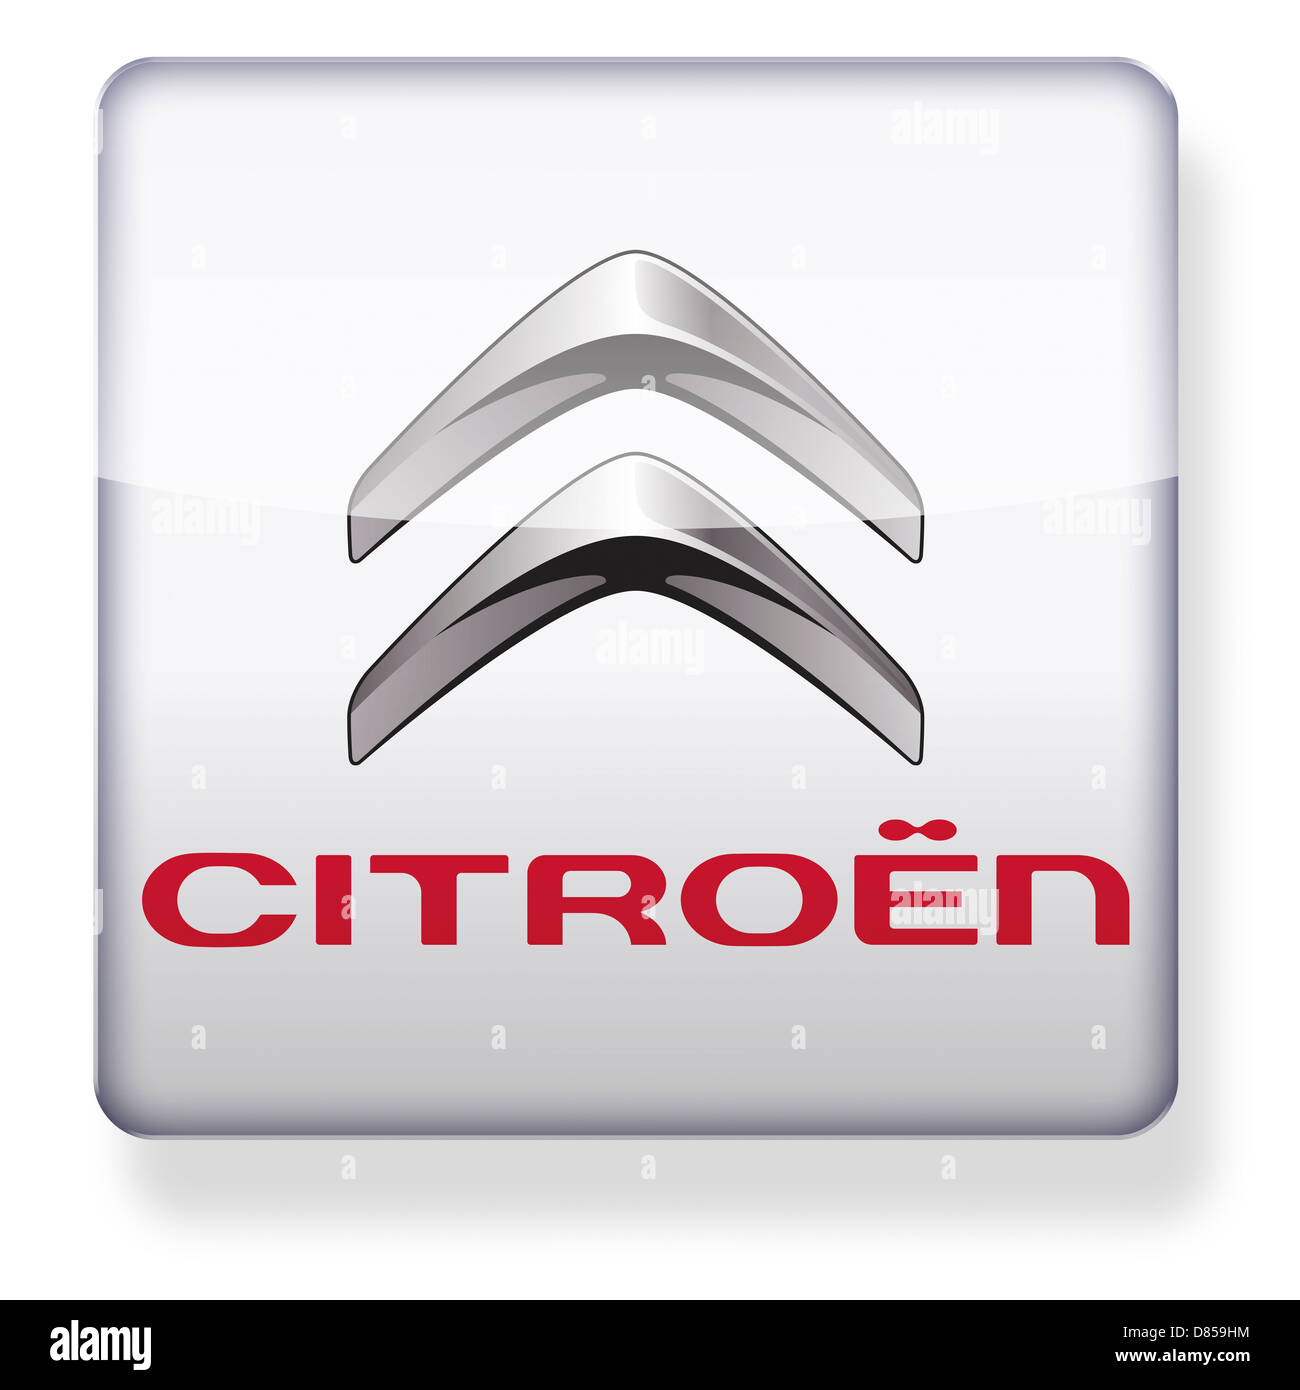 Citroen logo as an app icon. Clipping path included. Stock Photo